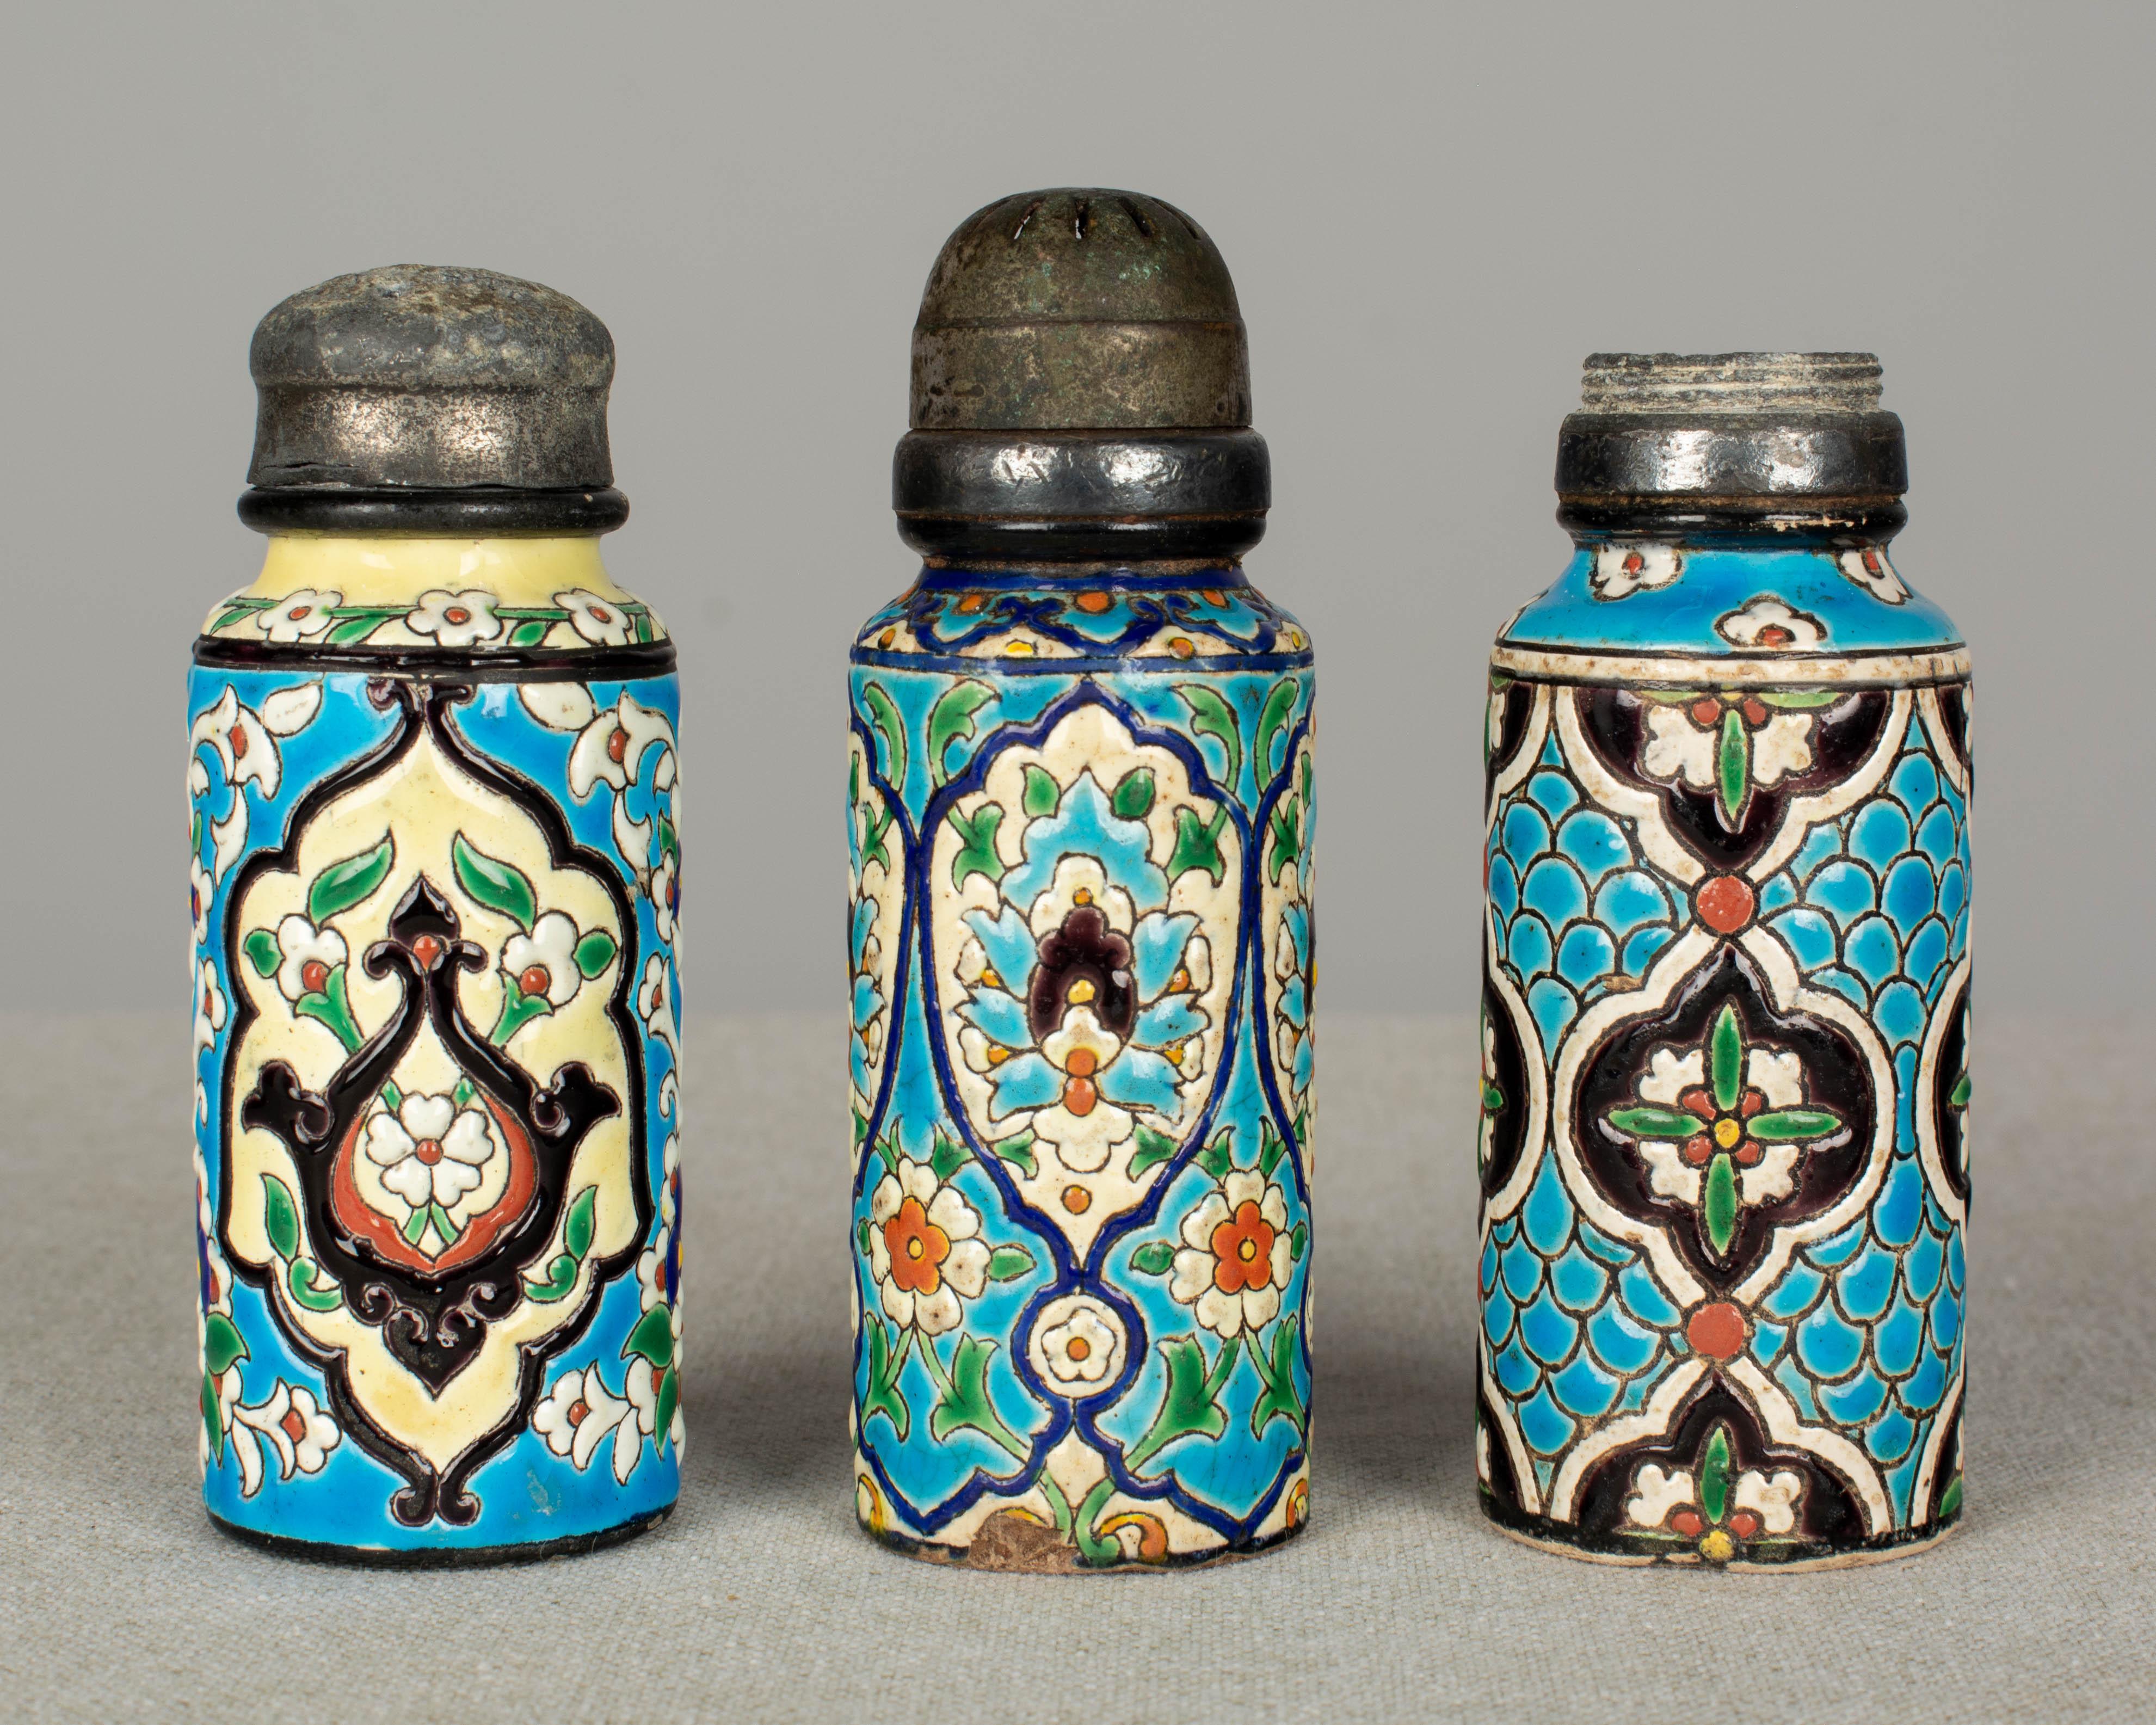 A set of four late 19th century French Longwy enamel cloisonné ceramic shakers. Three salt shakers and one muffiner, or sugar shaker. Decorated with hand painted stylized floral and leaf motifs in bright turquoise blue, orange, green, yellow and